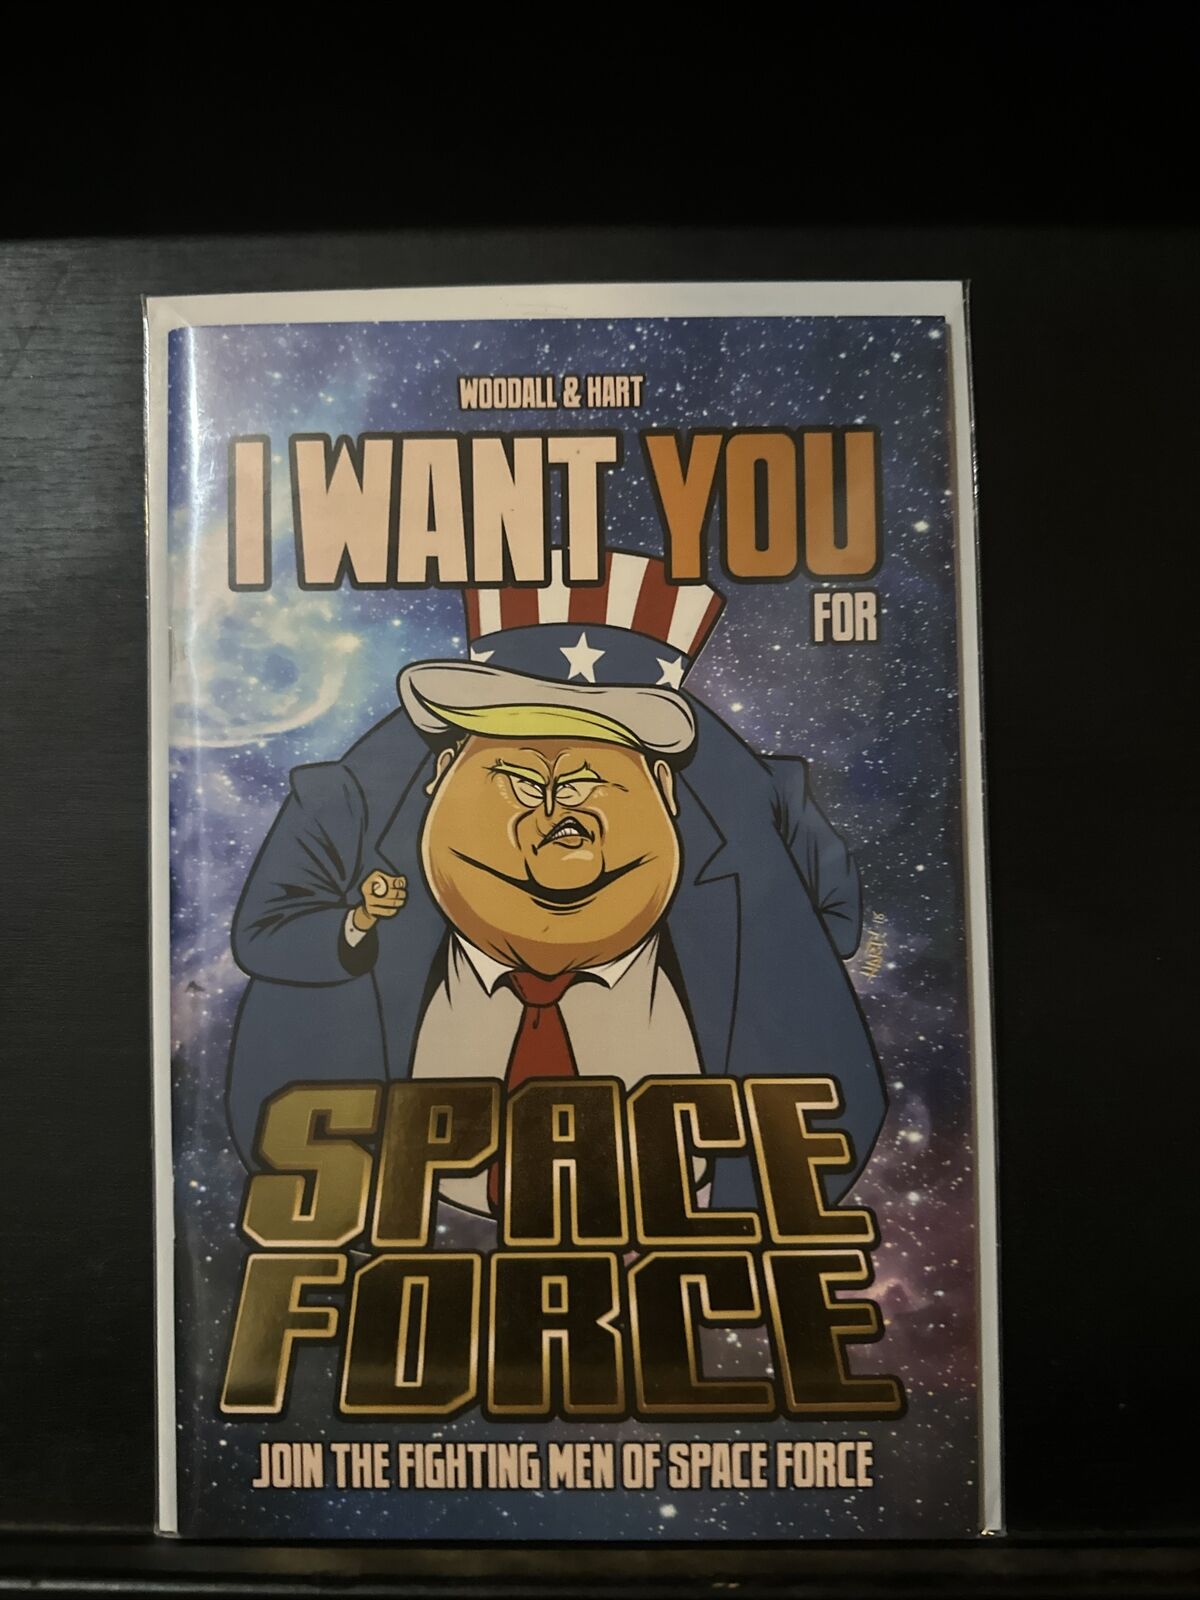 Fighting Men of Space Force Comic Book 2019 Rich Woodall Trump 1 of 100 made